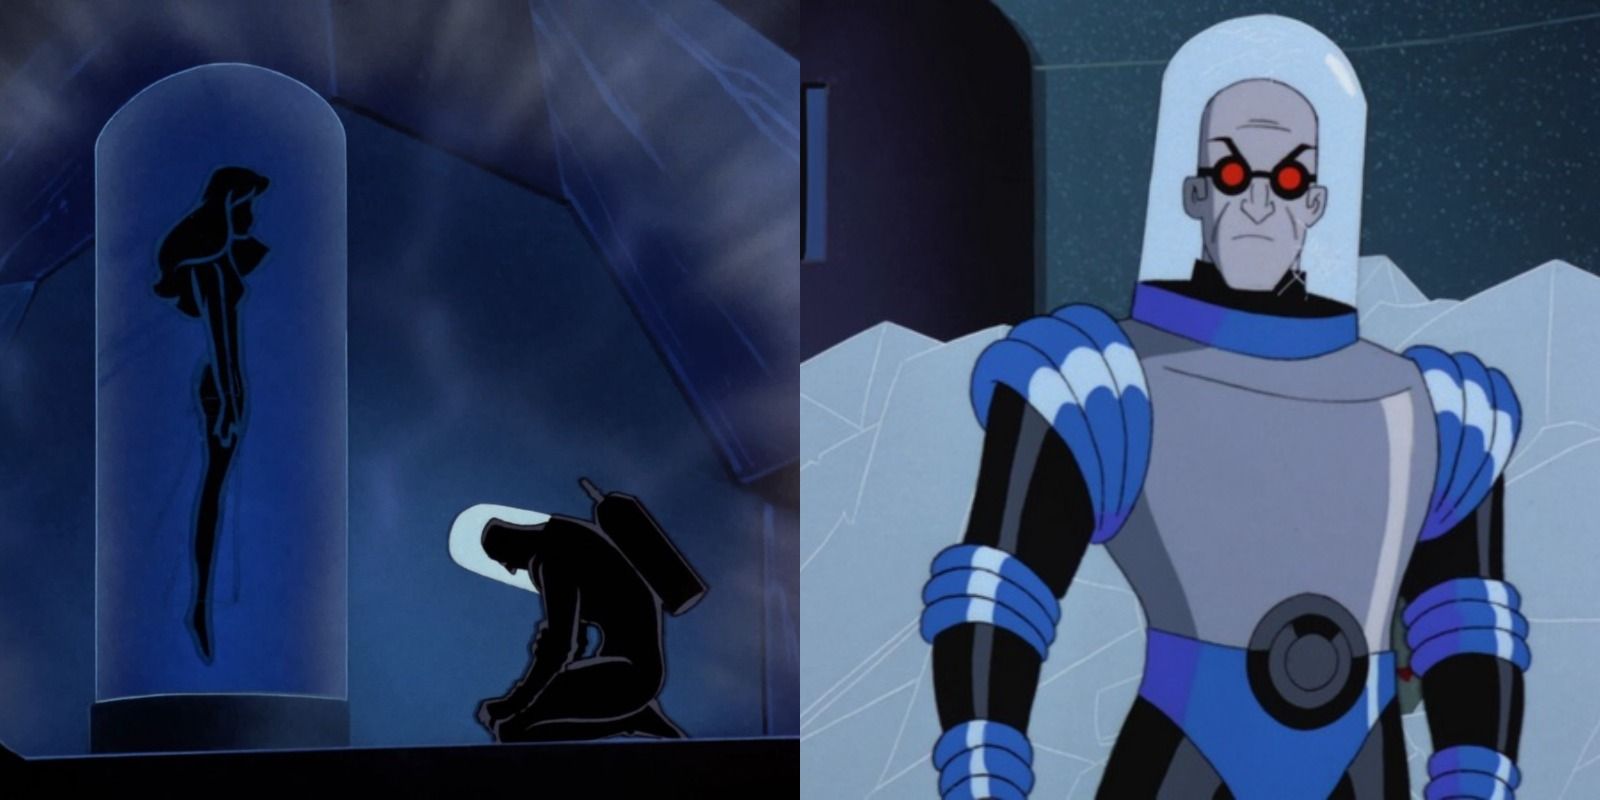 Mr. Freeze in BTAS and grieving over his terminally-ill wife